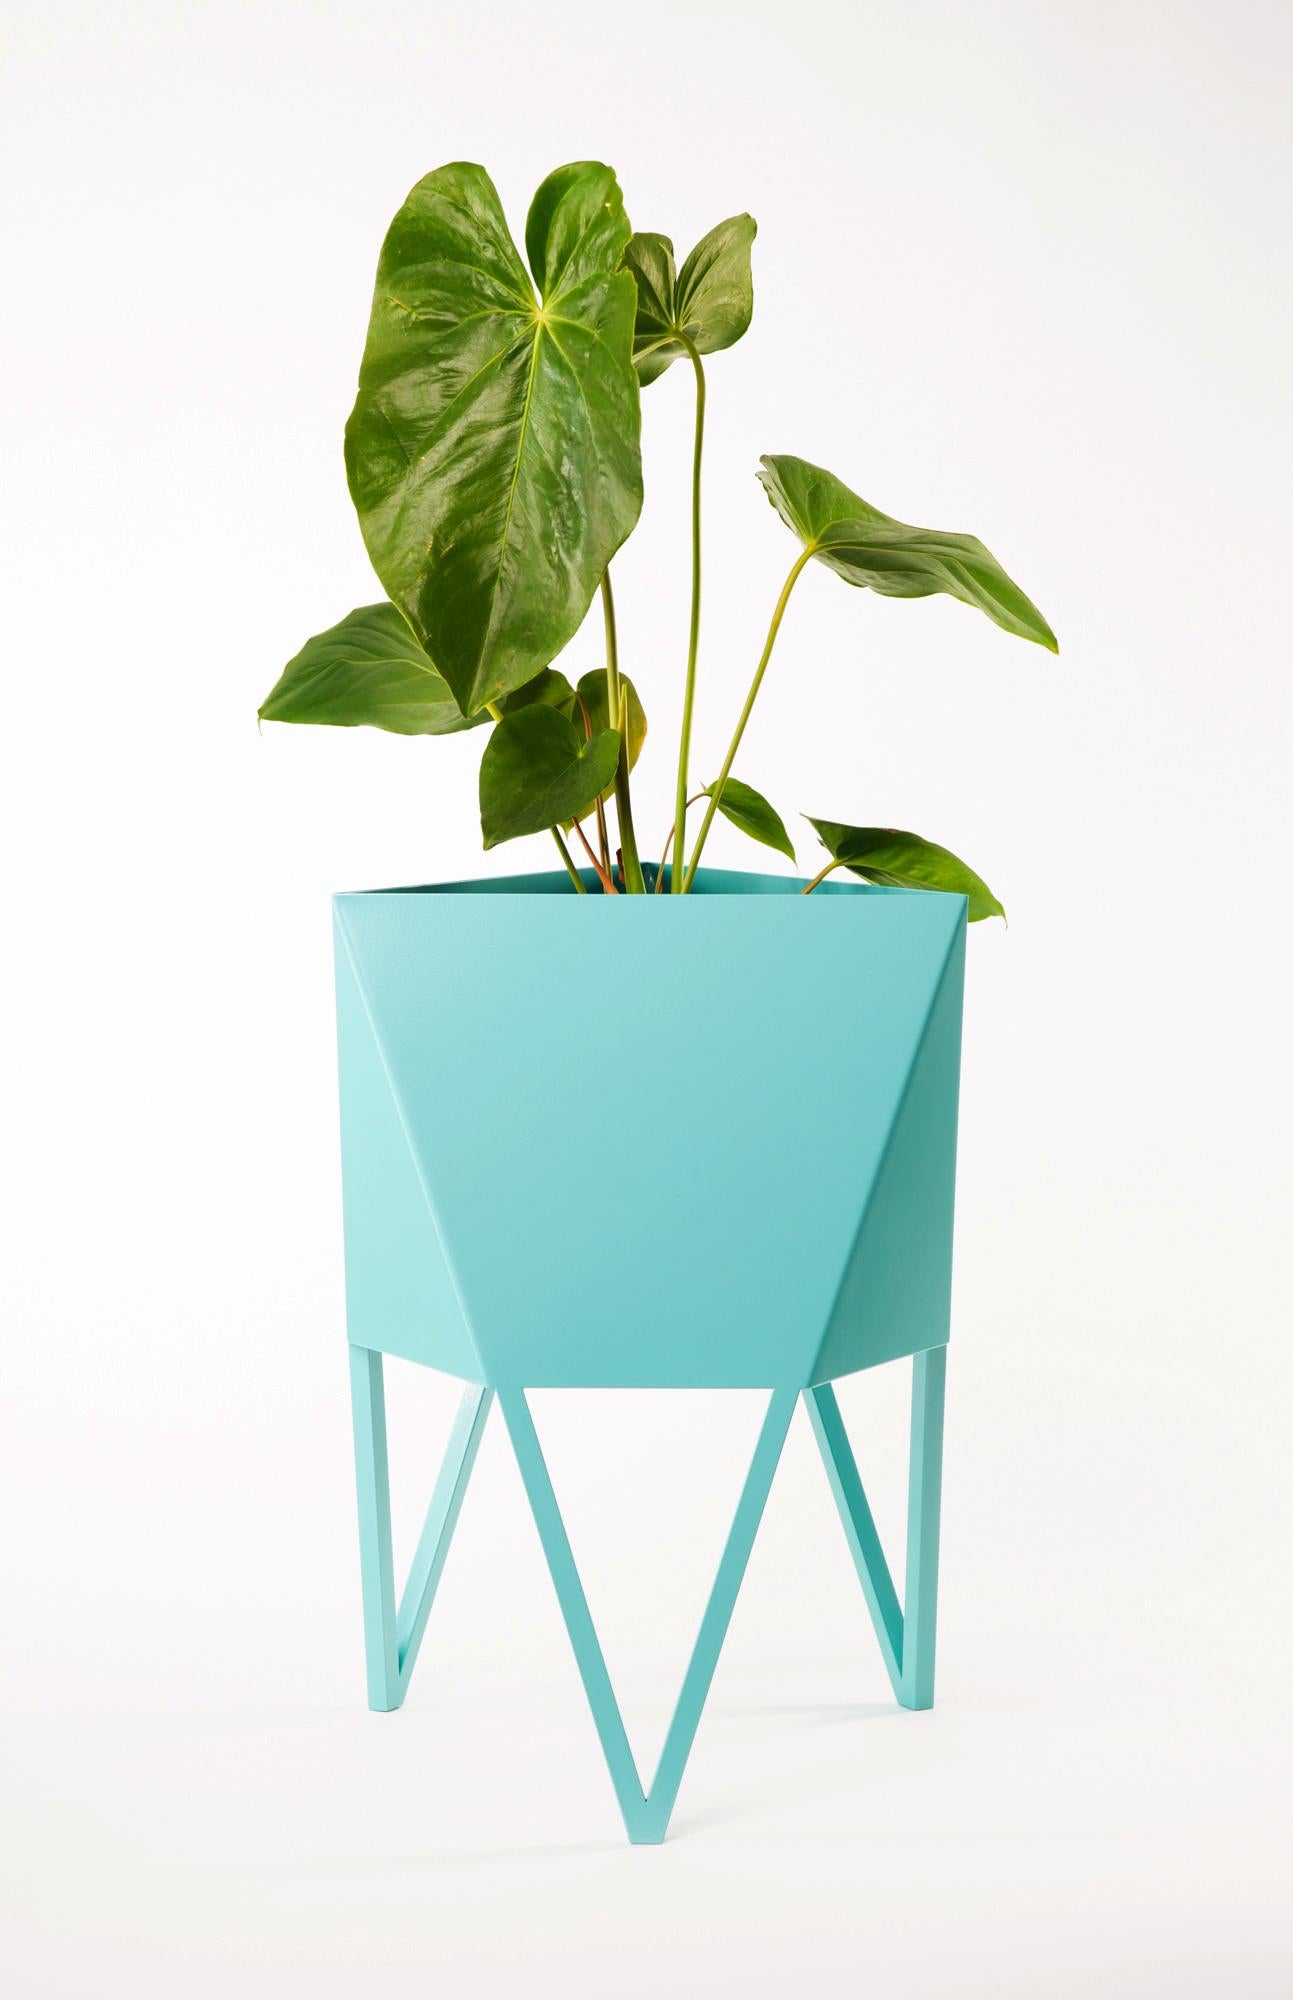 Large Deca Planter in Mint by Force/Collide, 2020 9